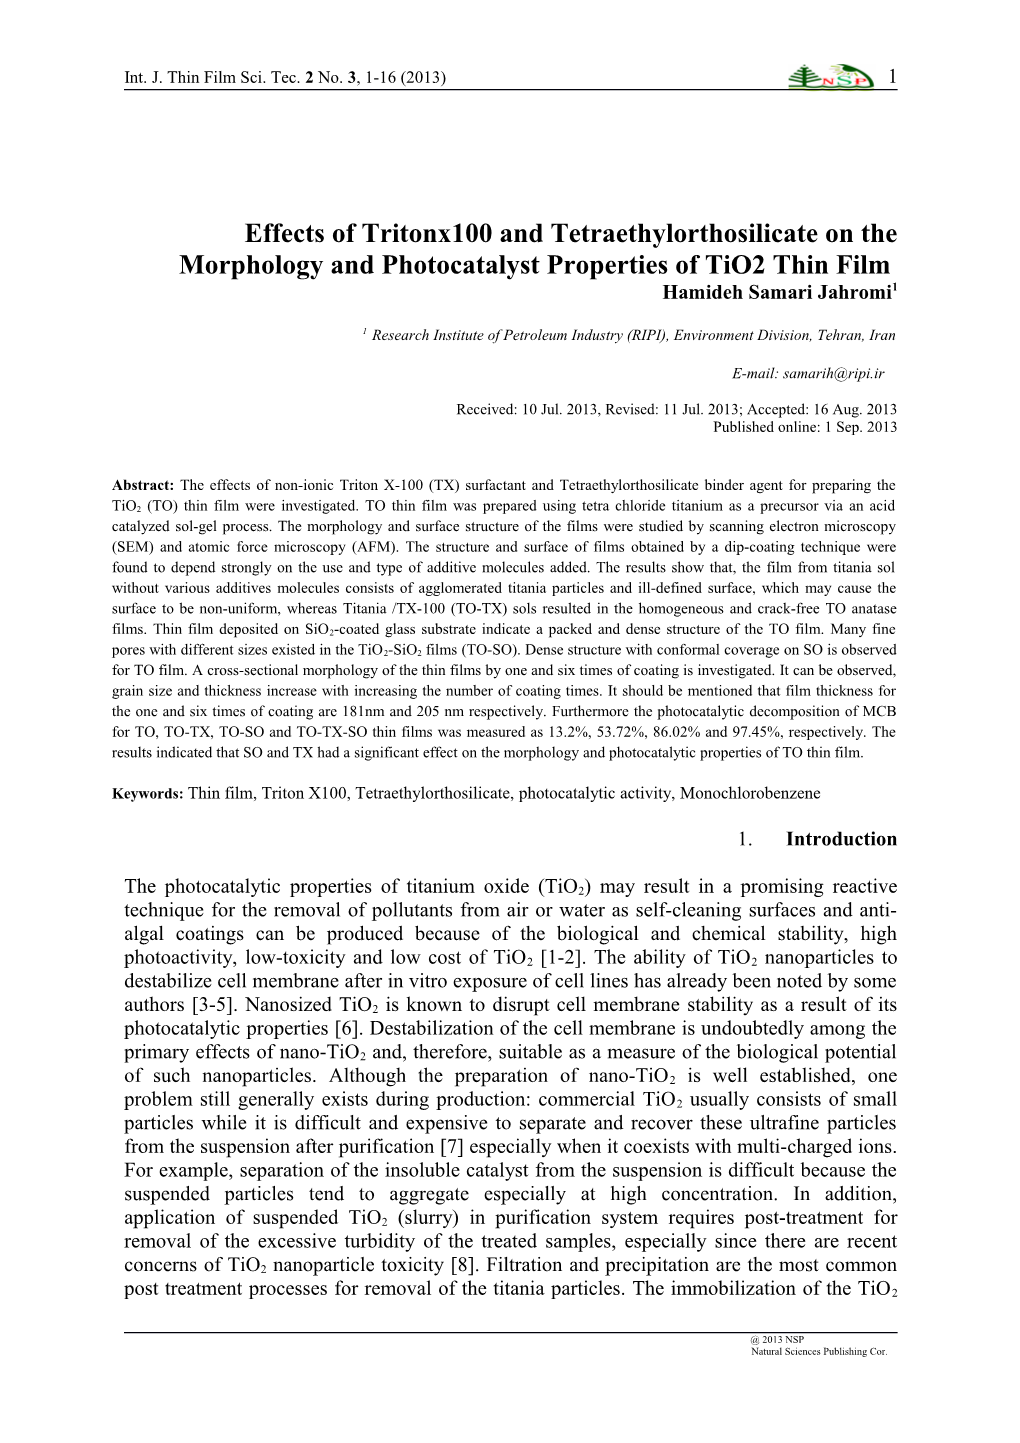 Effects of Tritonx100 and Tetraethylorthosilicate on the Morphology and Photocatalyst